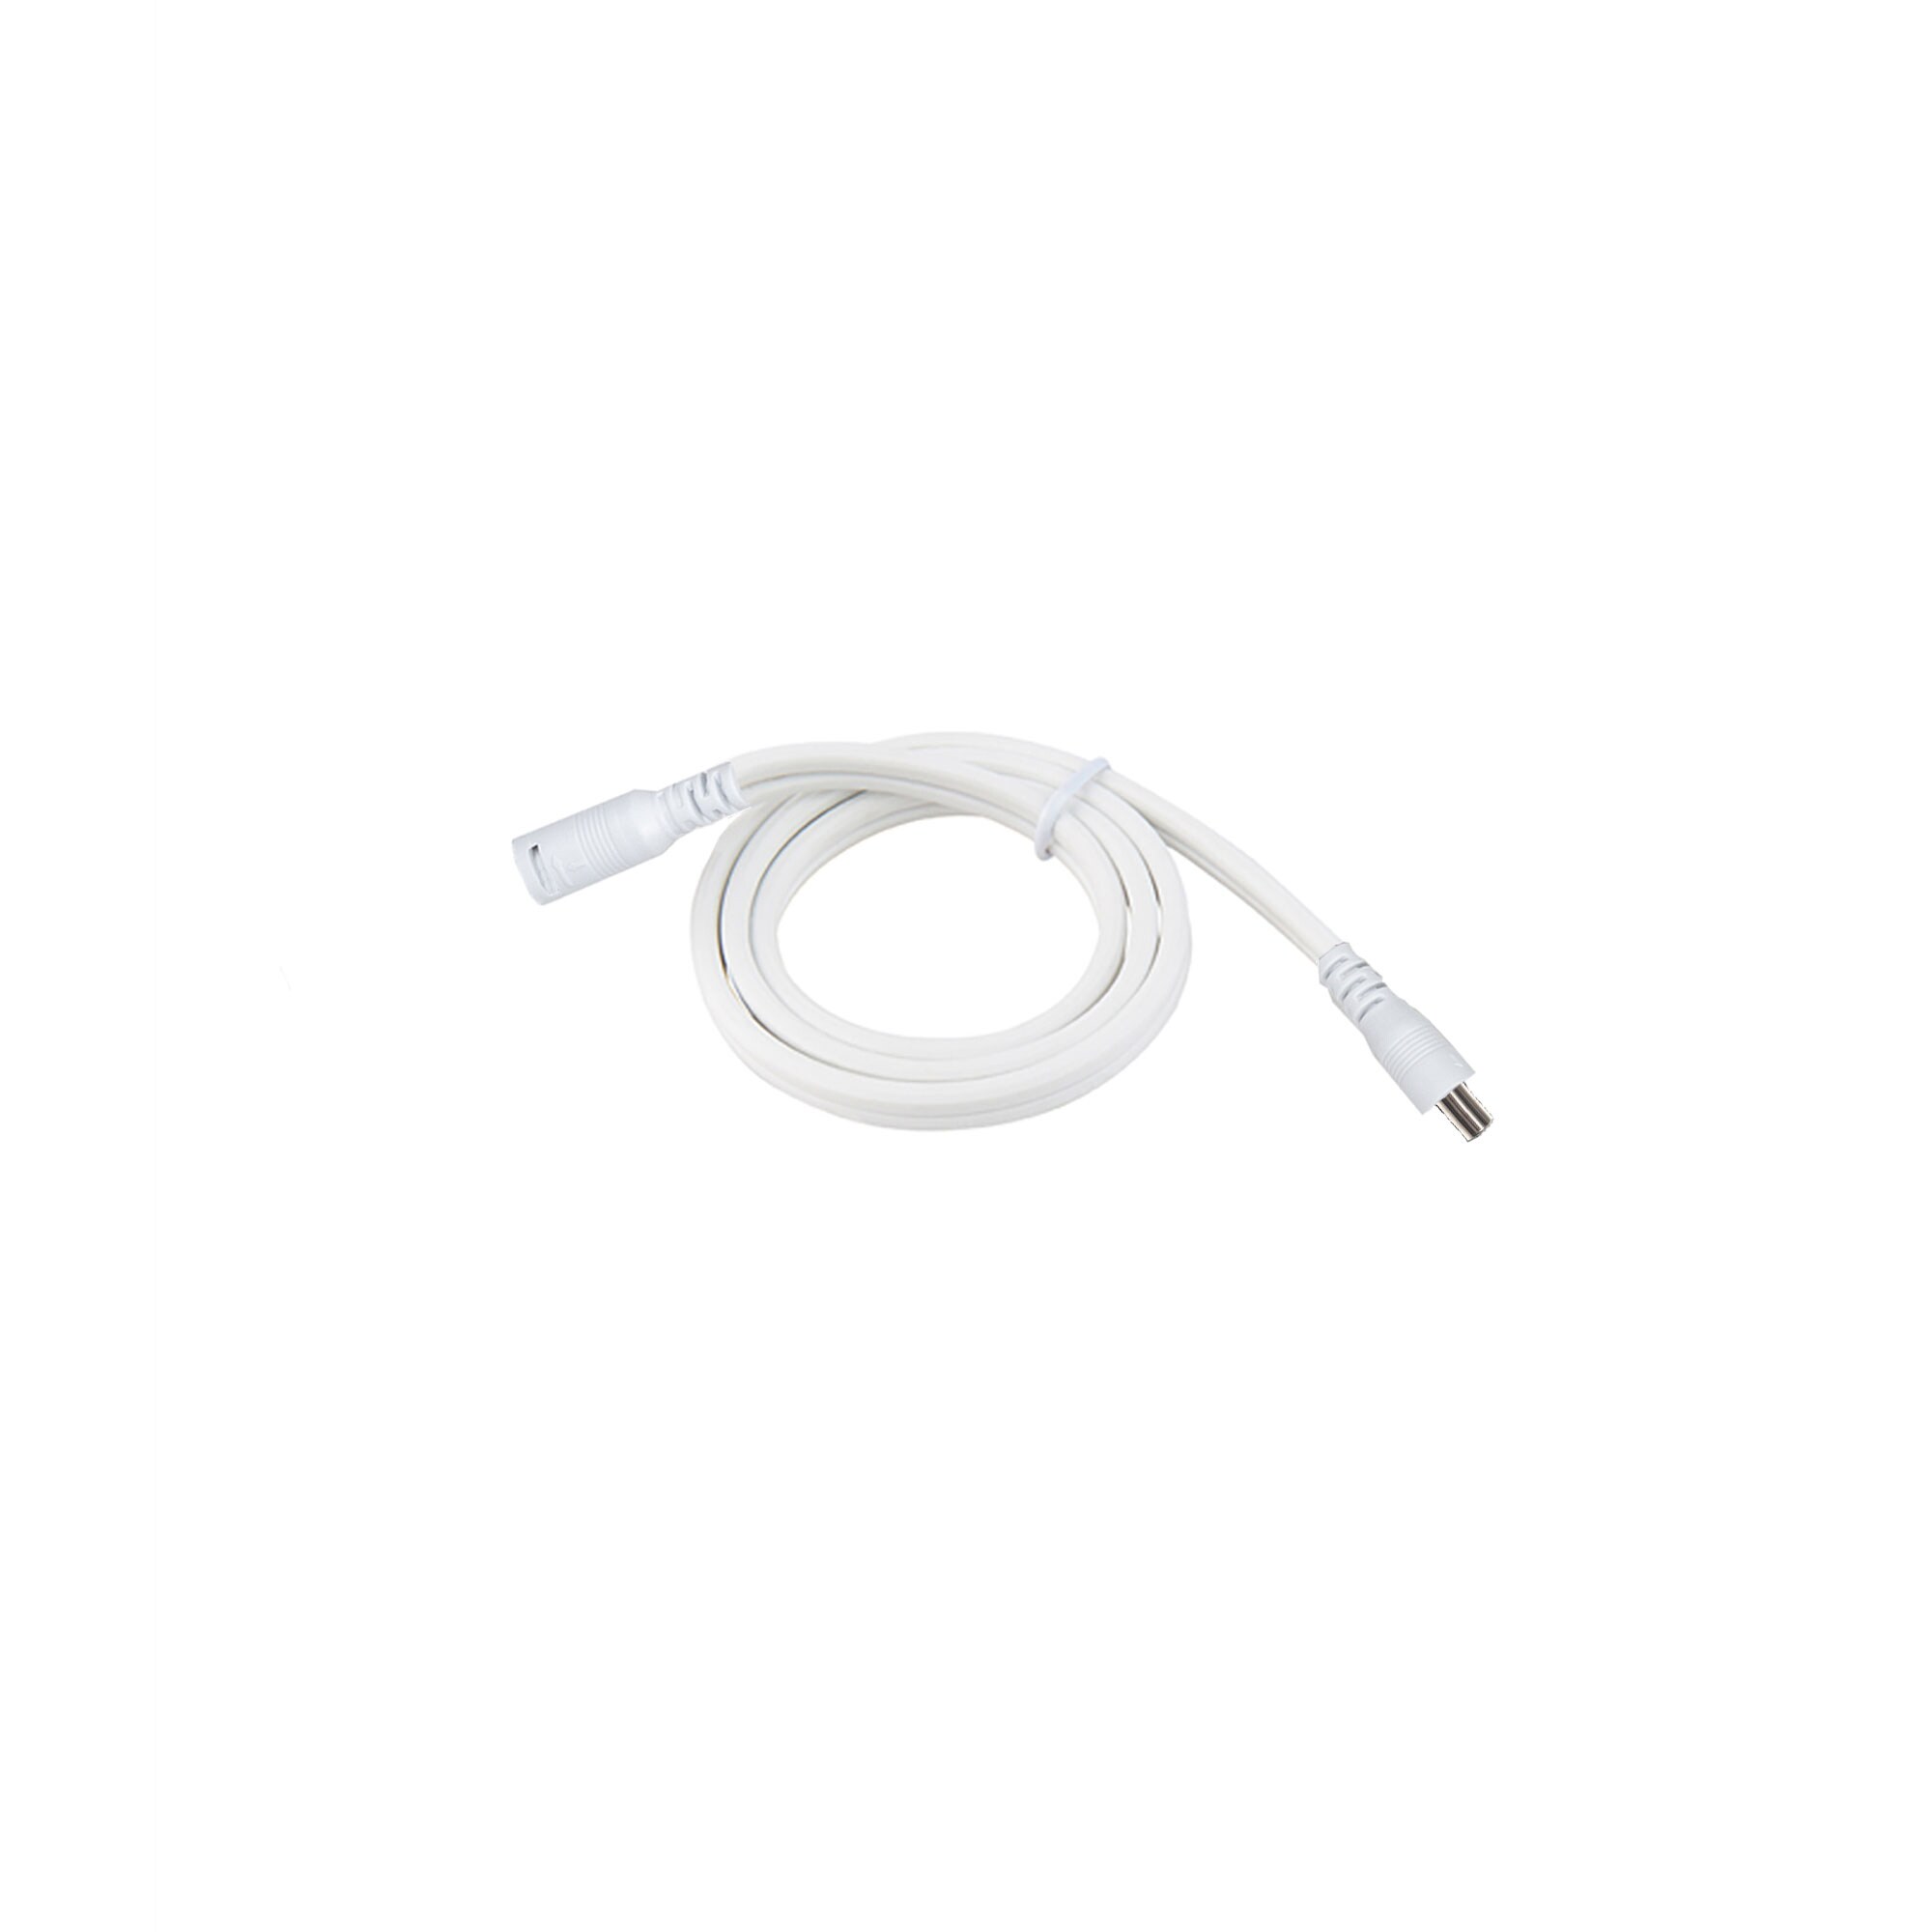 Philips 6' USB Extension Cable - White